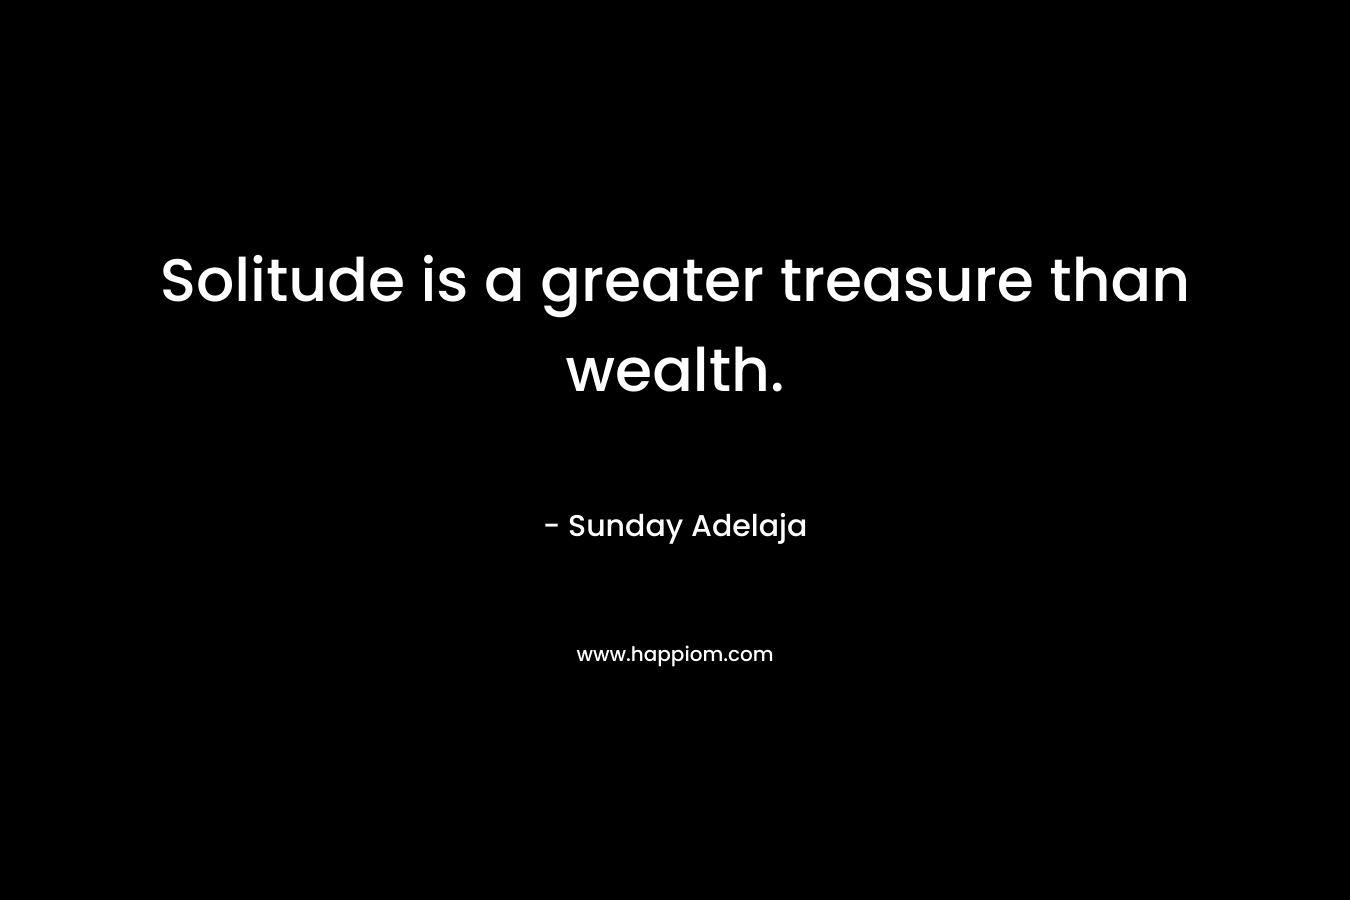 Solitude is a greater treasure than wealth.